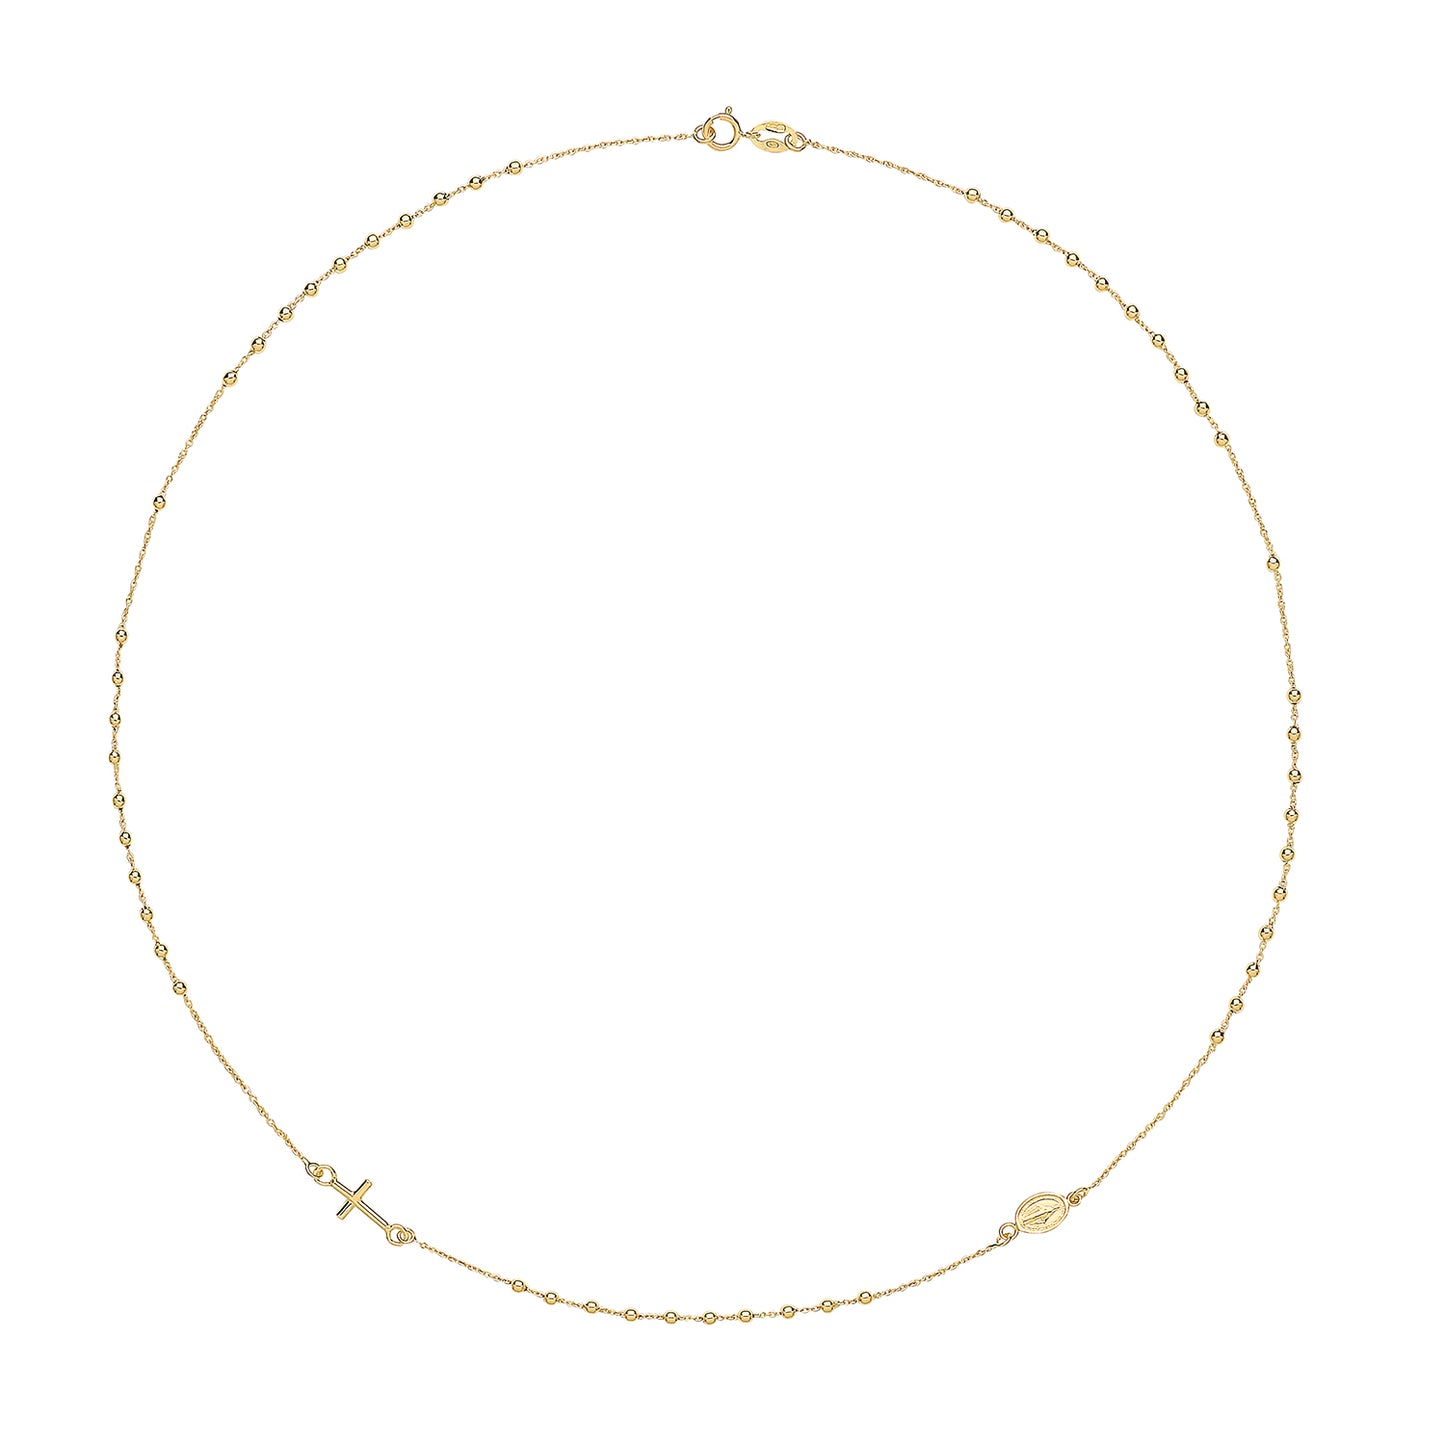 9ct Gold Rosary Necklace - John Ross Jewellers